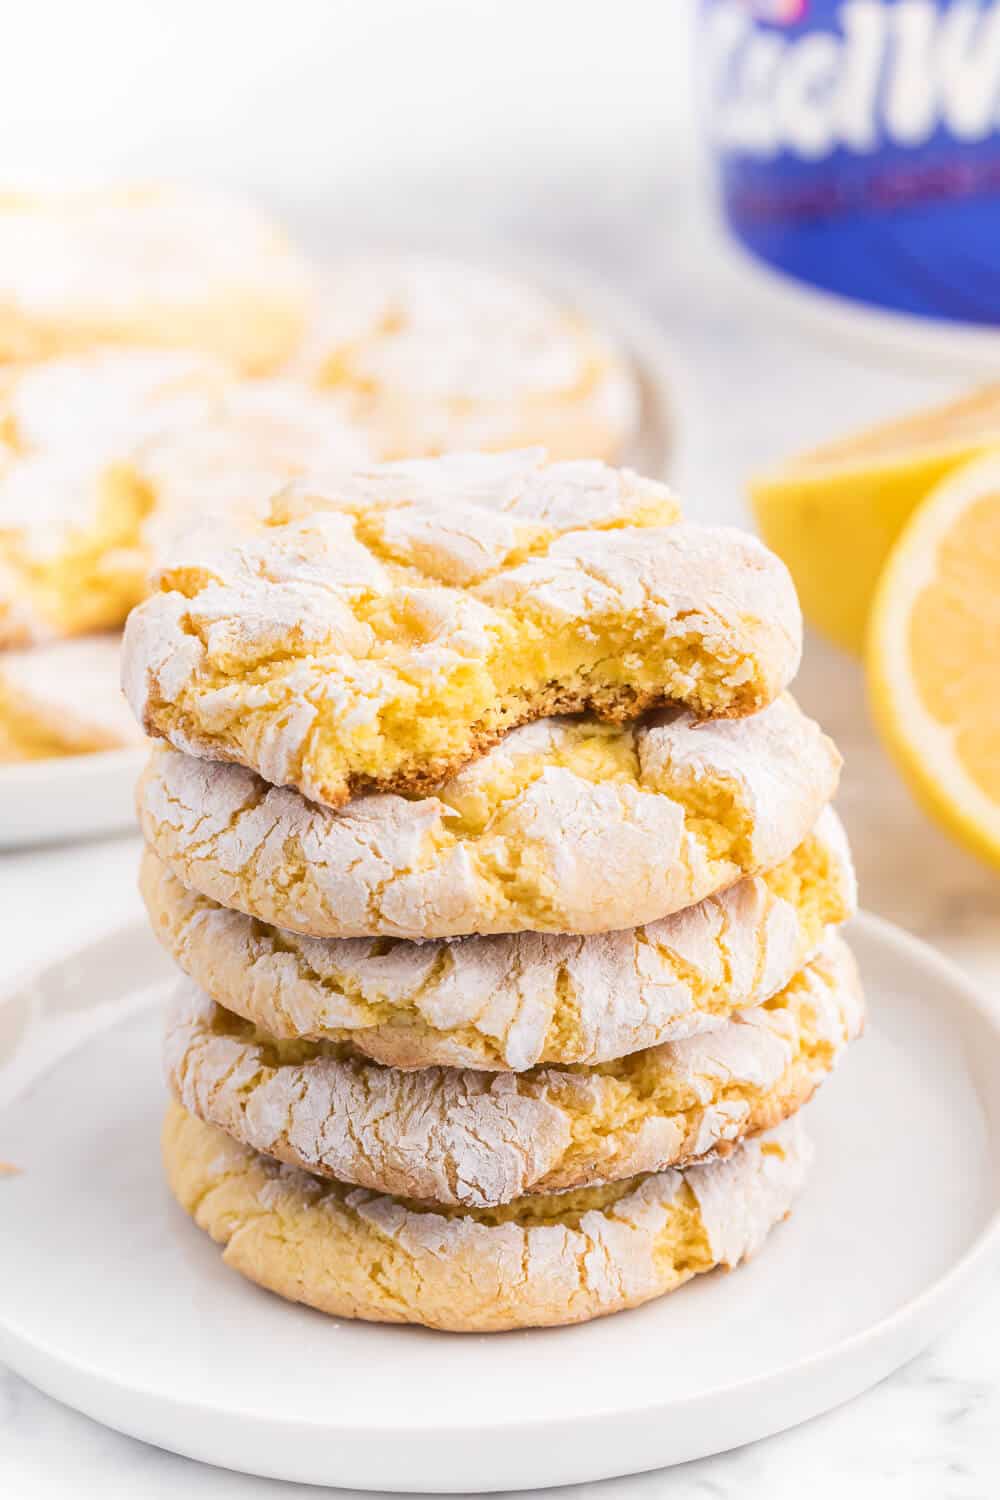 Cool Whip Cookies Recipe - One of the easiest cookie recipes you'll ever make. Grab a box of your favorite cake mix, Cool Whip, an egg and powdered sugar and get started! Create a variety of flavors like lemon, strawberry, red velvet, funfetti, chocolate and more.